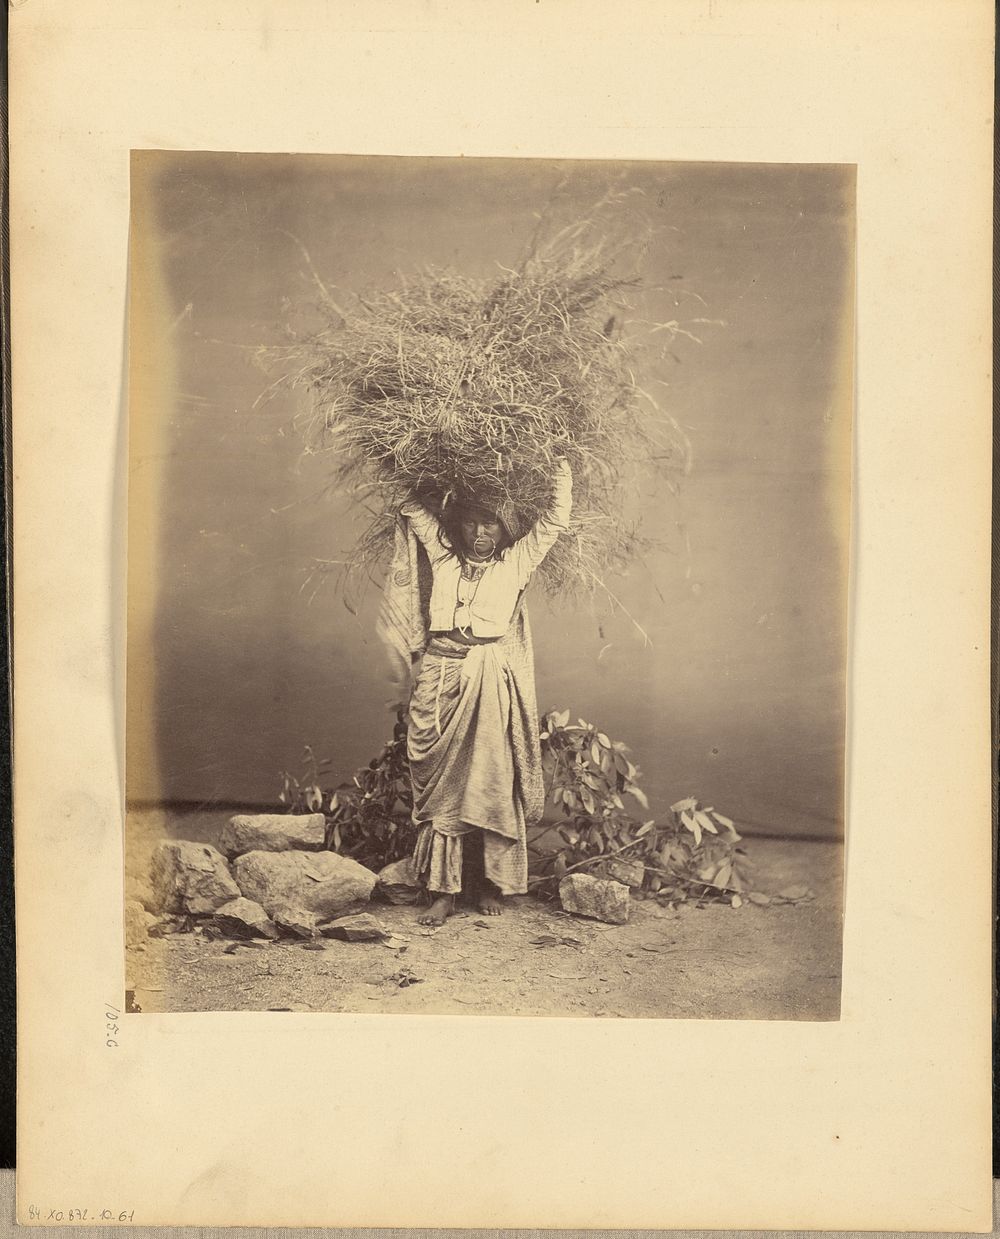 Indian peasant young woman holding twigs on her head by John Edward Saché